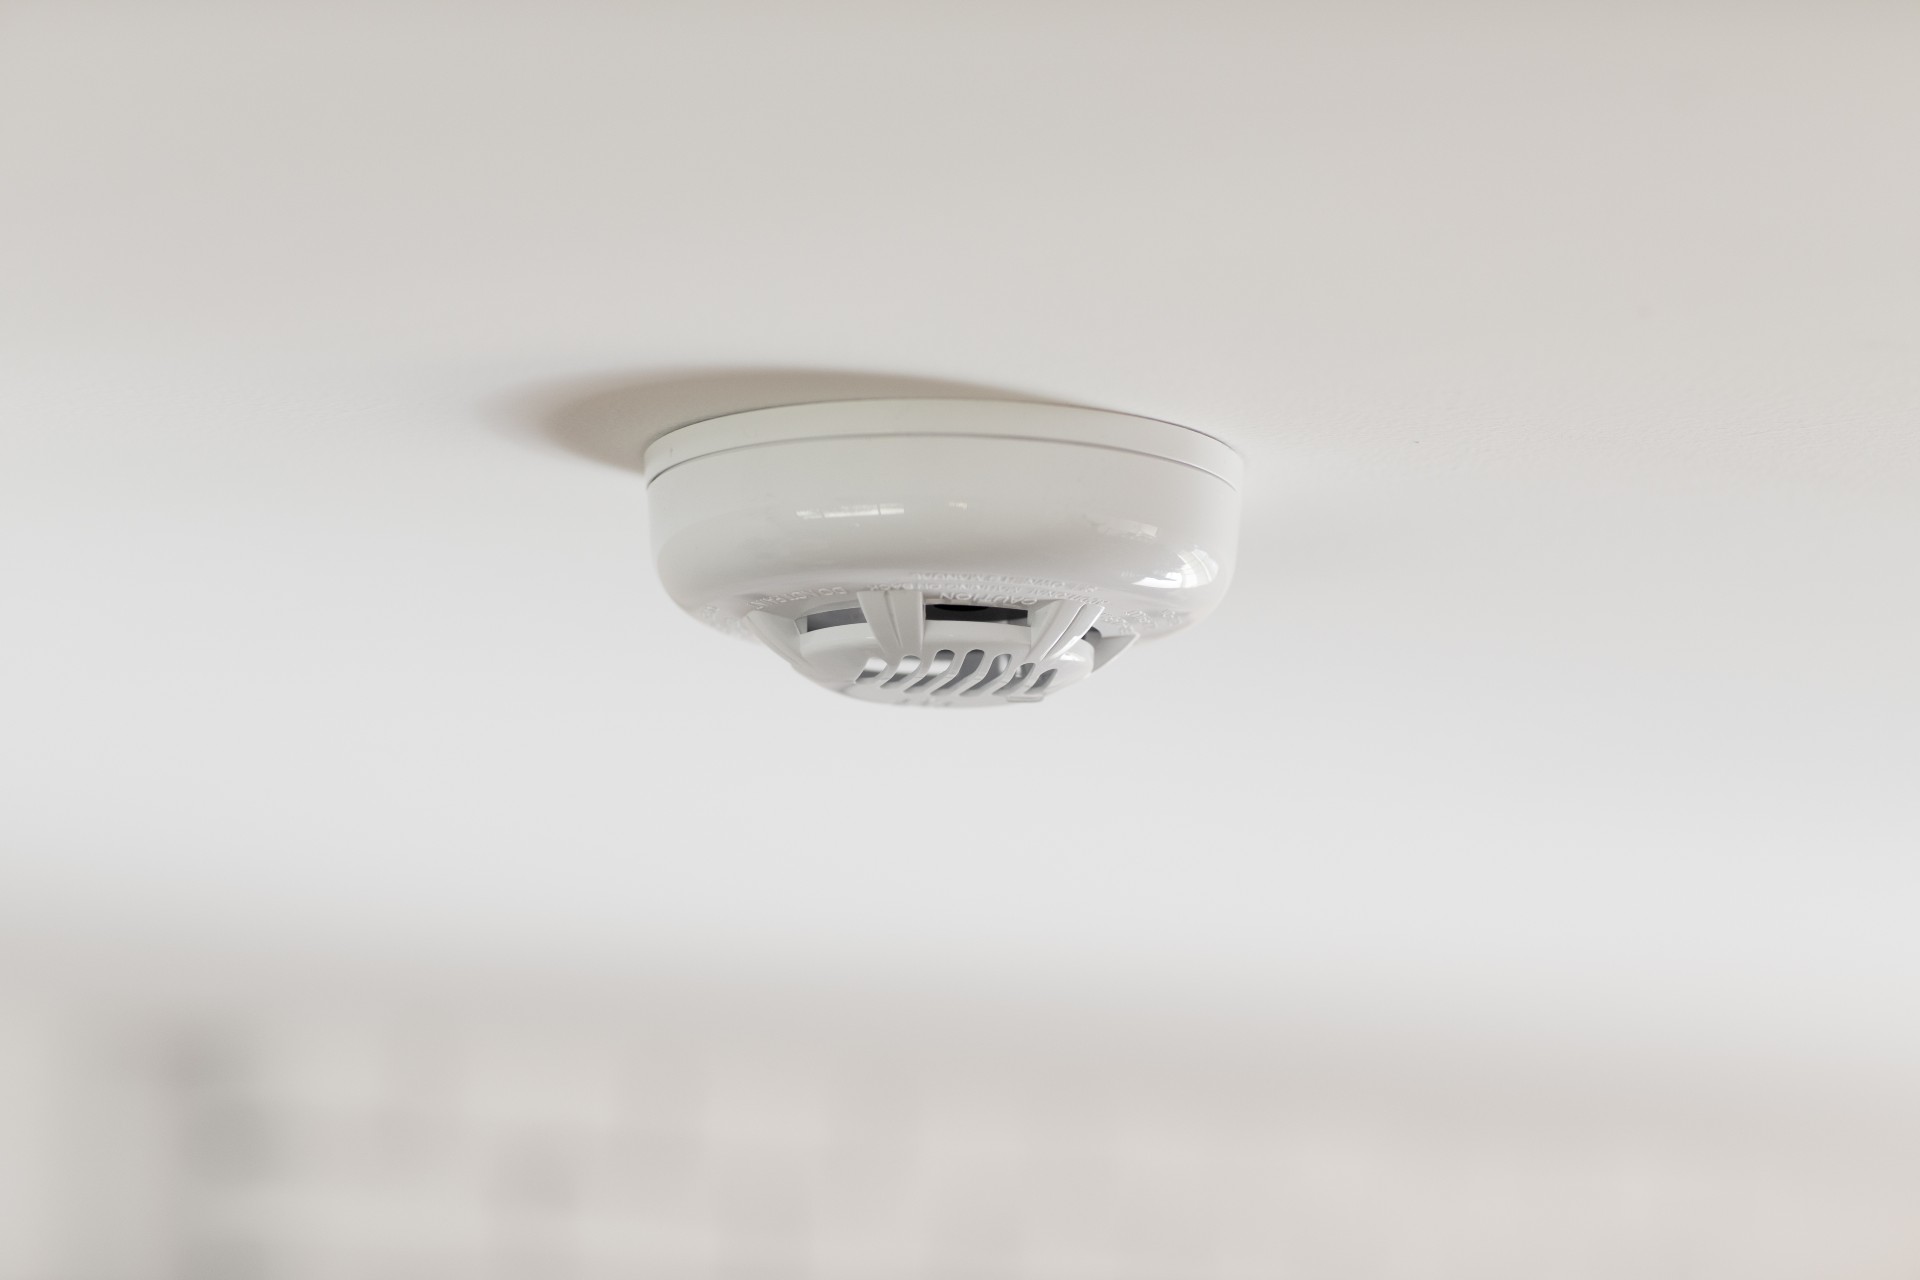 How To Change Batteries In A Vivint Smoke Detector